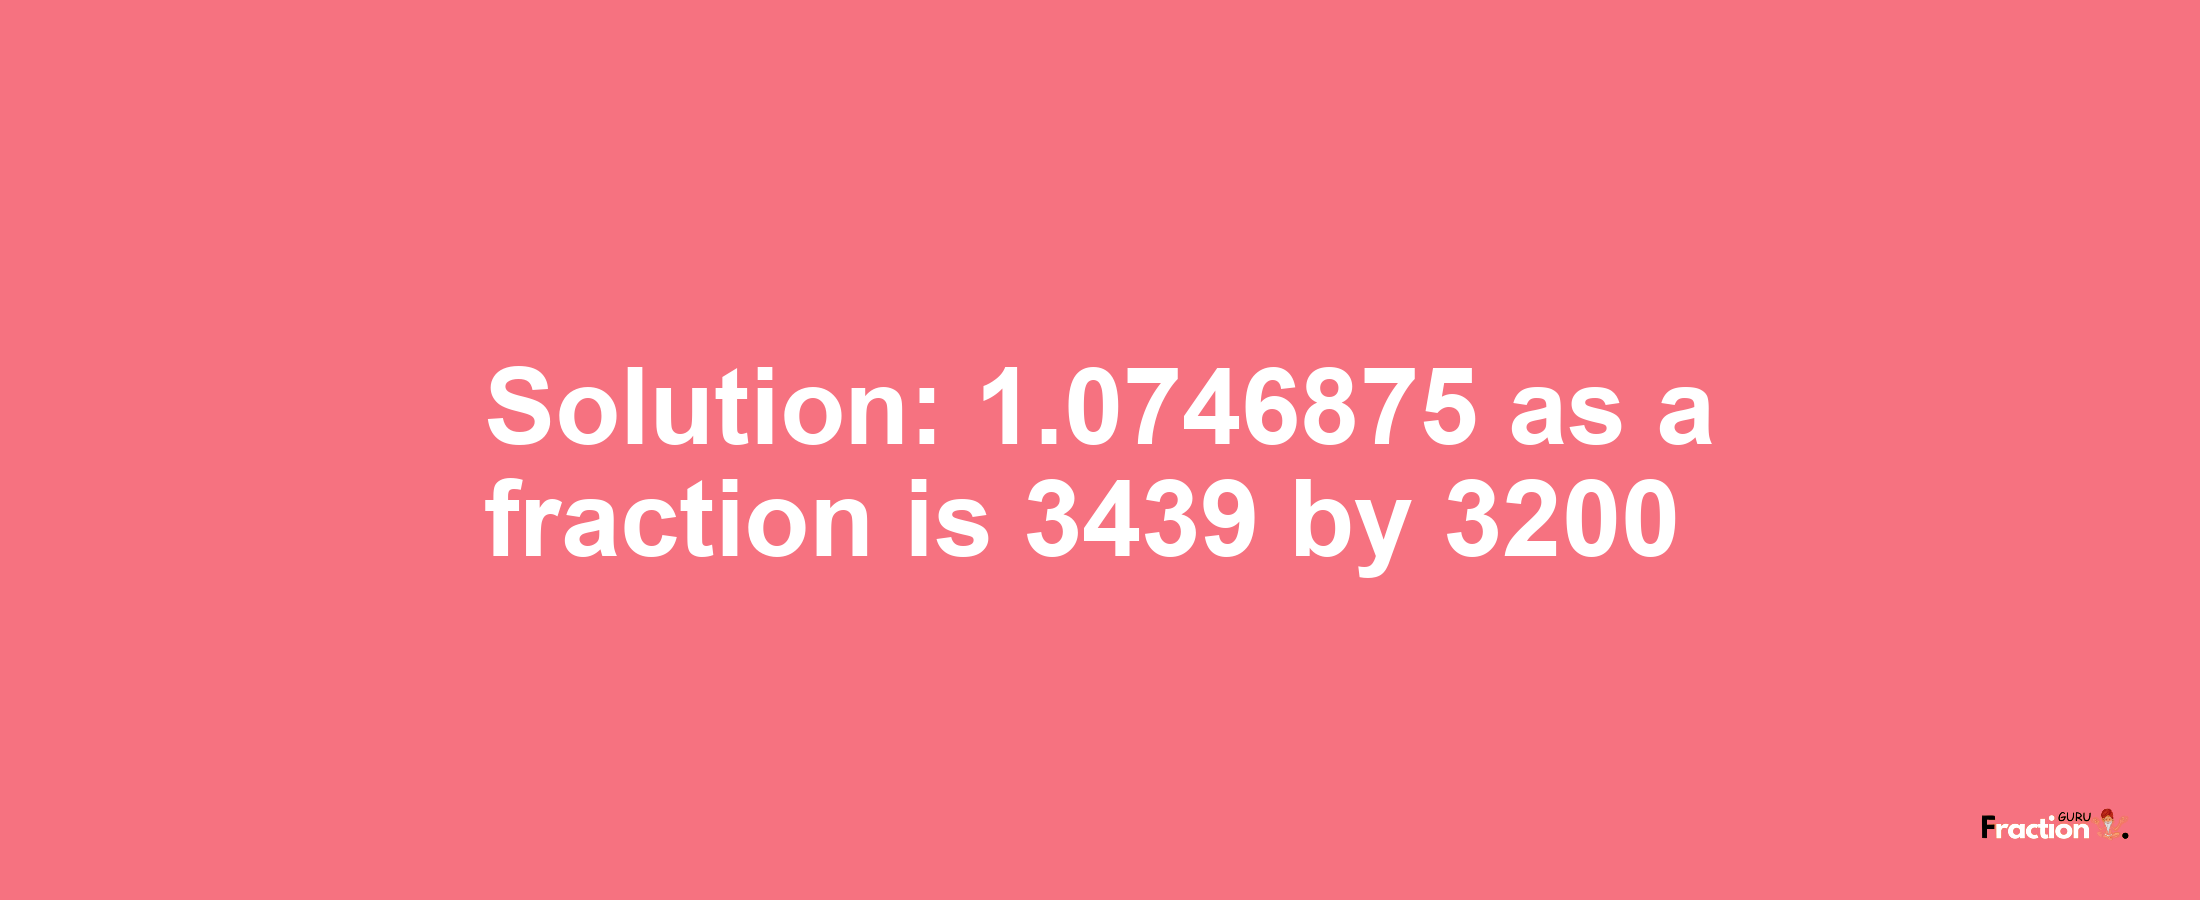 Solution:1.0746875 as a fraction is 3439/3200